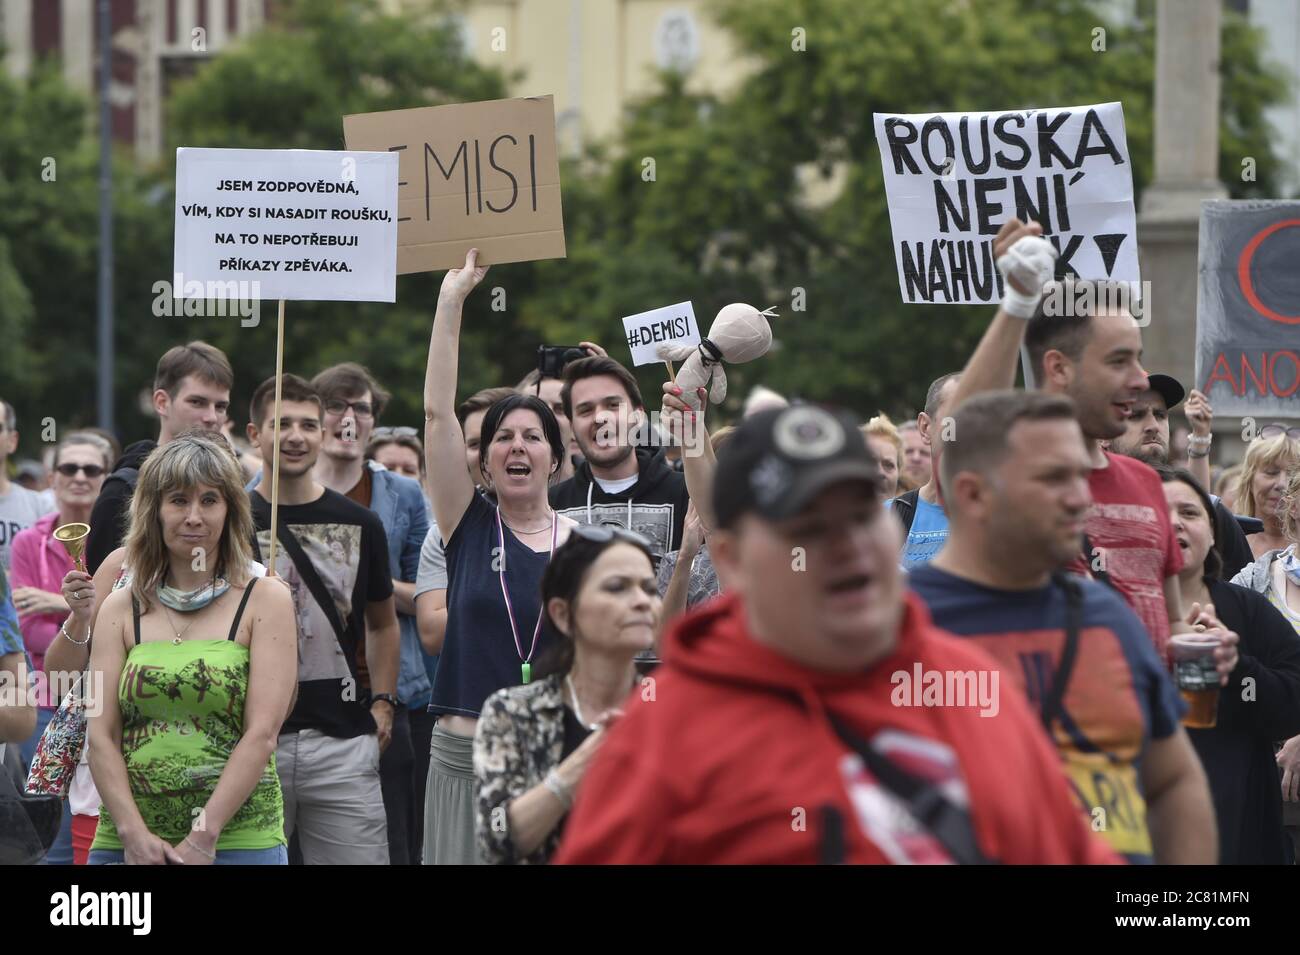 About 2,000 people protests against the steps taken by the government and the Regional Public Health Station (KHS) when dealing with the coronavirus spread in Ostrava, Moravia, Czech Republic, July 20, 2020. The protesters said the government and its bodies had proceeded in a confusing and chaotic way and informing the public about its measures belatedly. The people decided to take to the streets after the KHS stiffened the lockdown measures on Friday, July 17. They took effect immediately after being declared. (CTK Photo/Jaroslav Ozana) Stock Photo